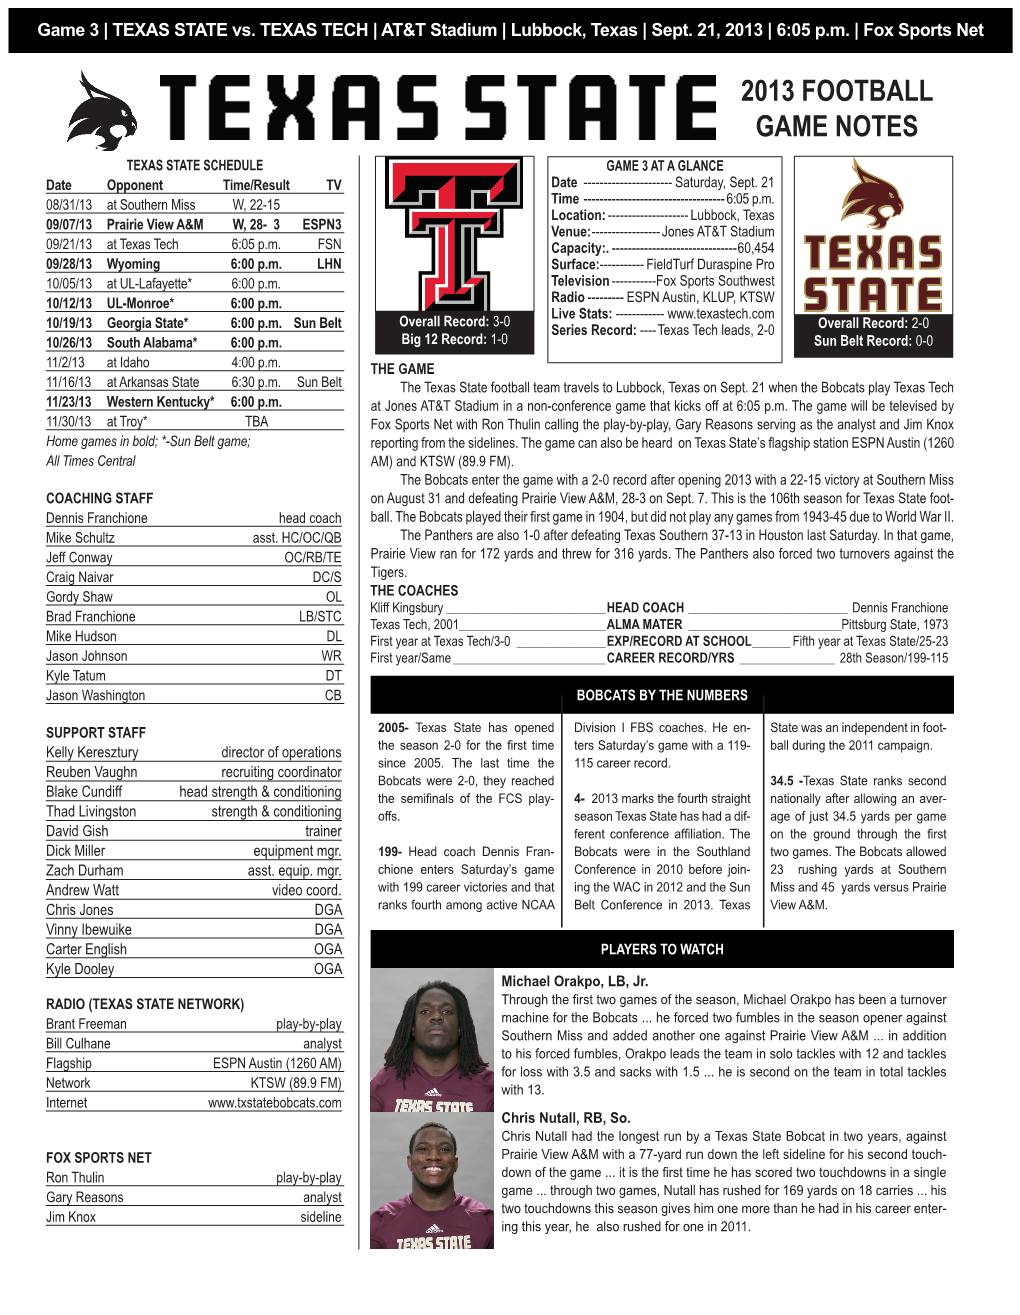 2013 Football Game Notes